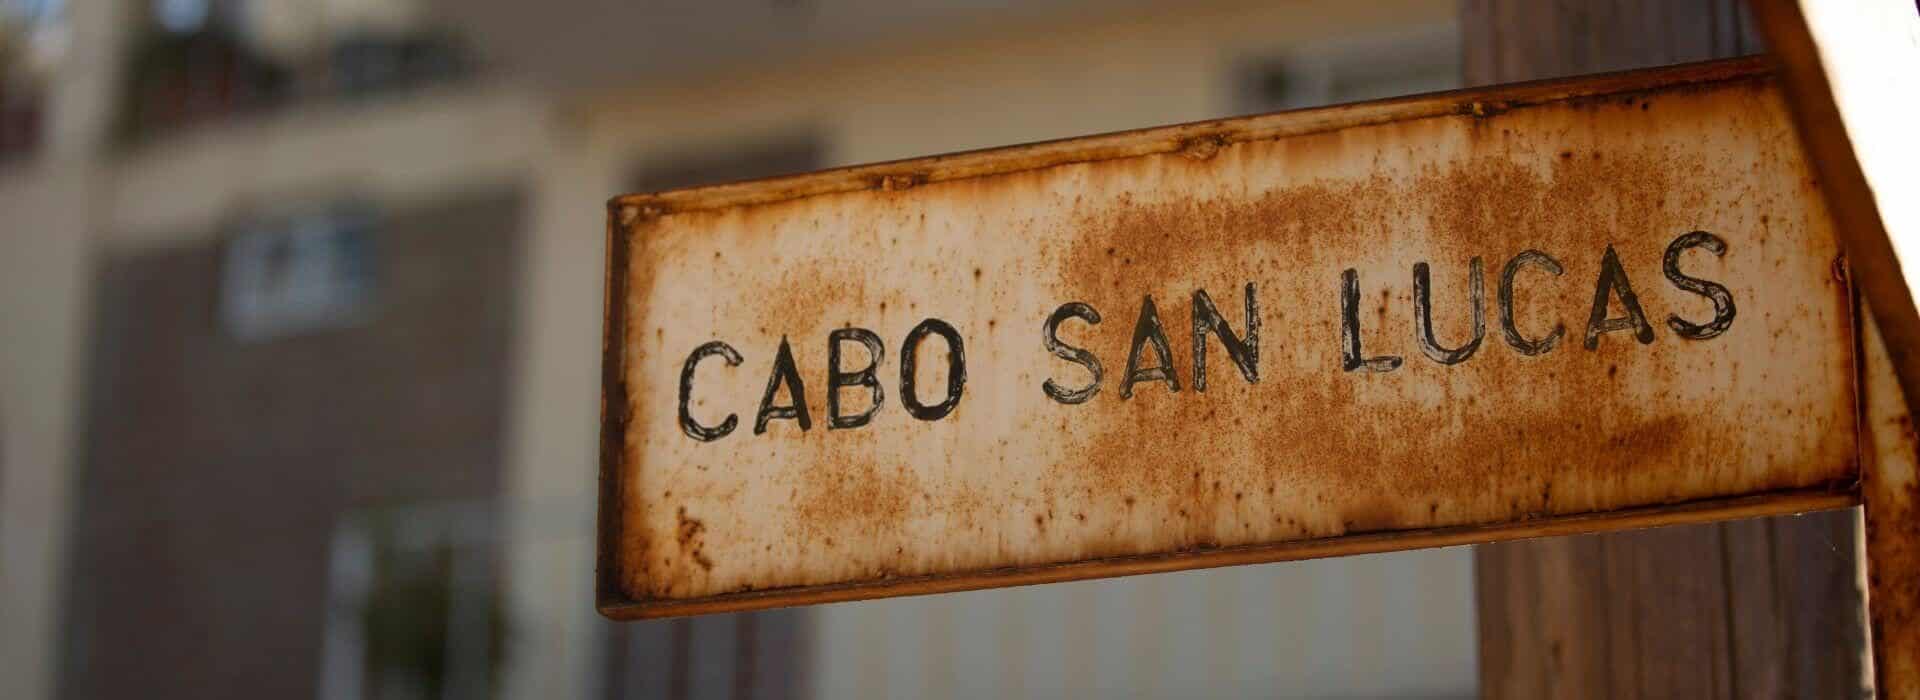 A rusty metal sign that says CABO SAN LUCAS